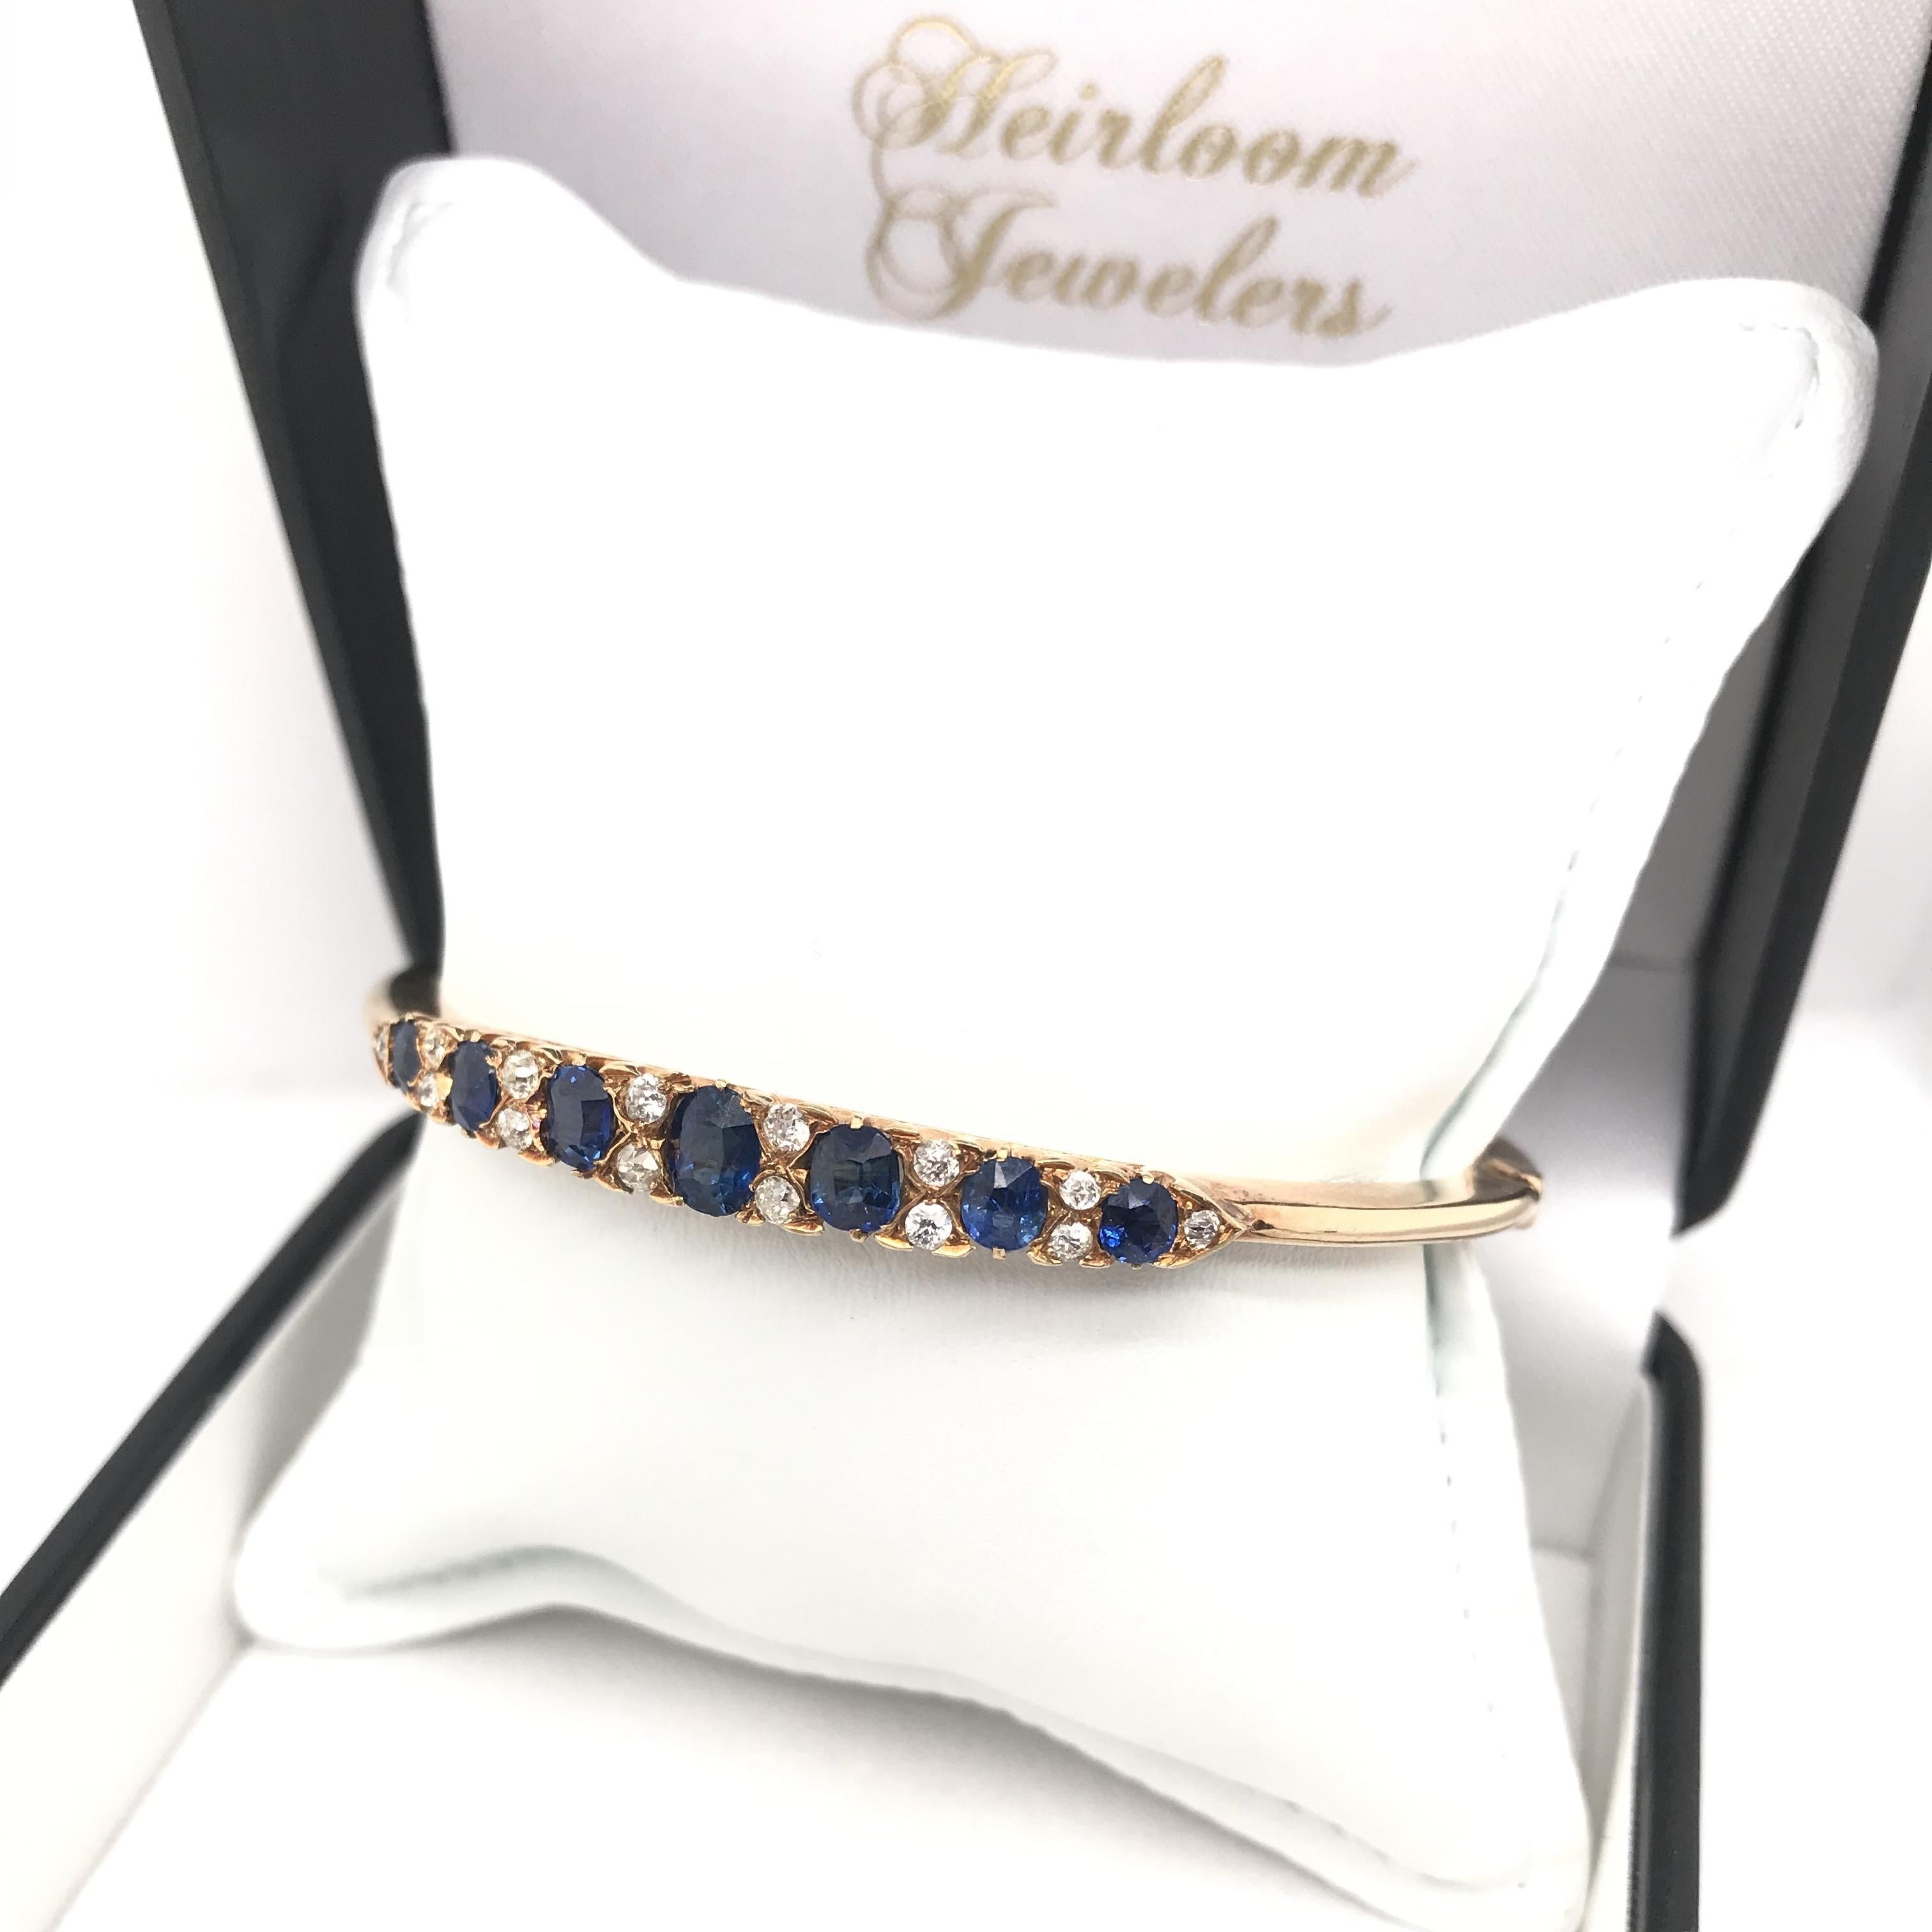 This antique bangle bracelet was crafted sometime during the late Victorian design period (1840-1900). The 18K gold setting features seven richly hued and antique oval cut blue sapphires. The sapphires have been certified by the Gemological